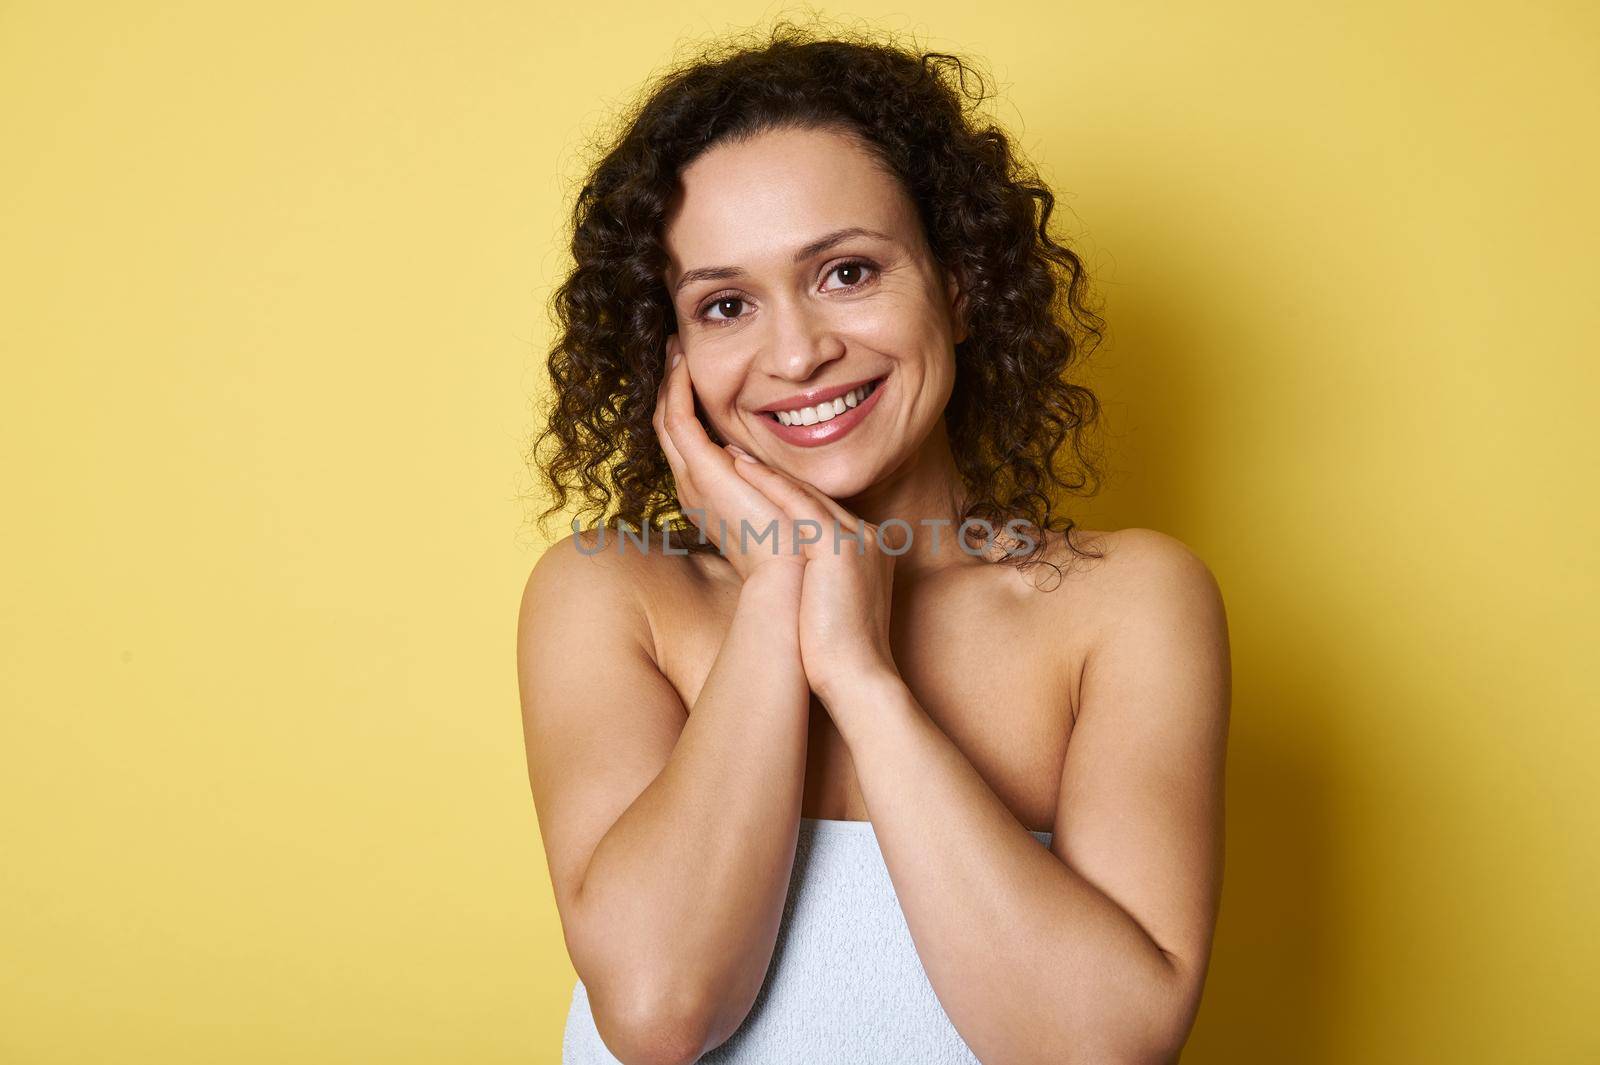 Portrait of beautiful young smiling African American woman with curly short hair, looking at camera while posing over yellow background with copy space